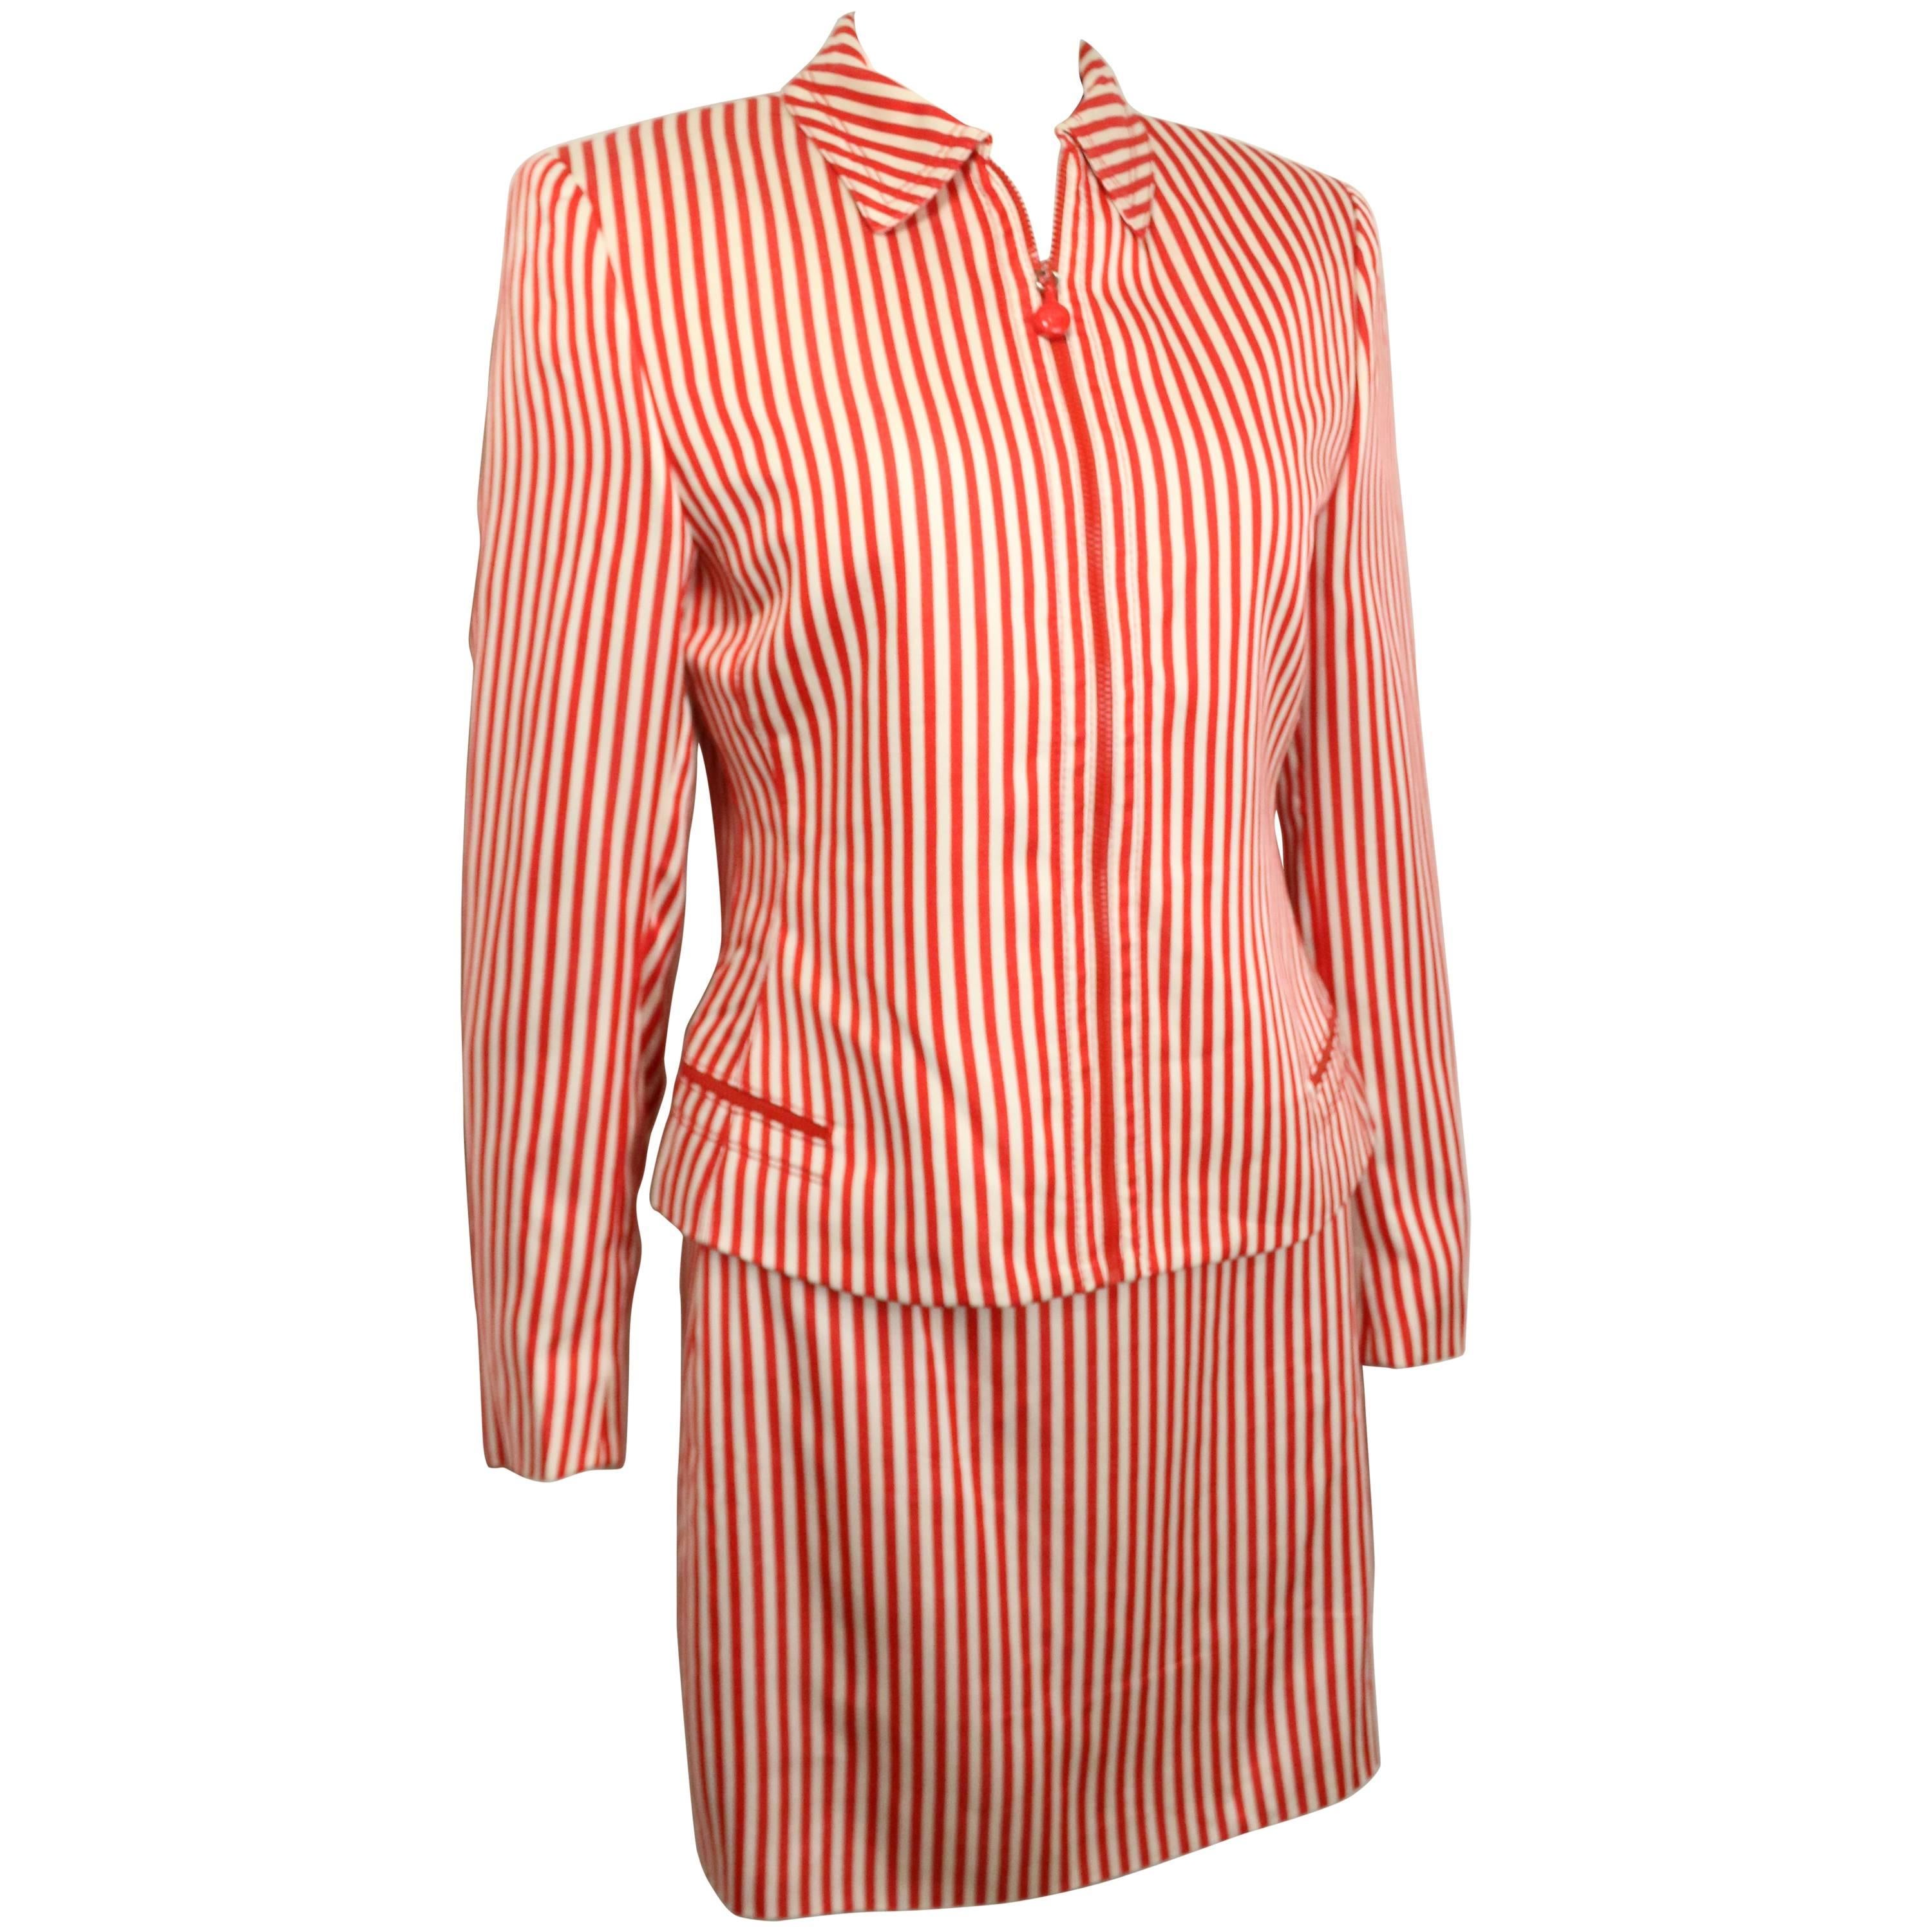 Gianni Versace Couture Red and White Stripe Silk Jacket and Skirt Ensemble